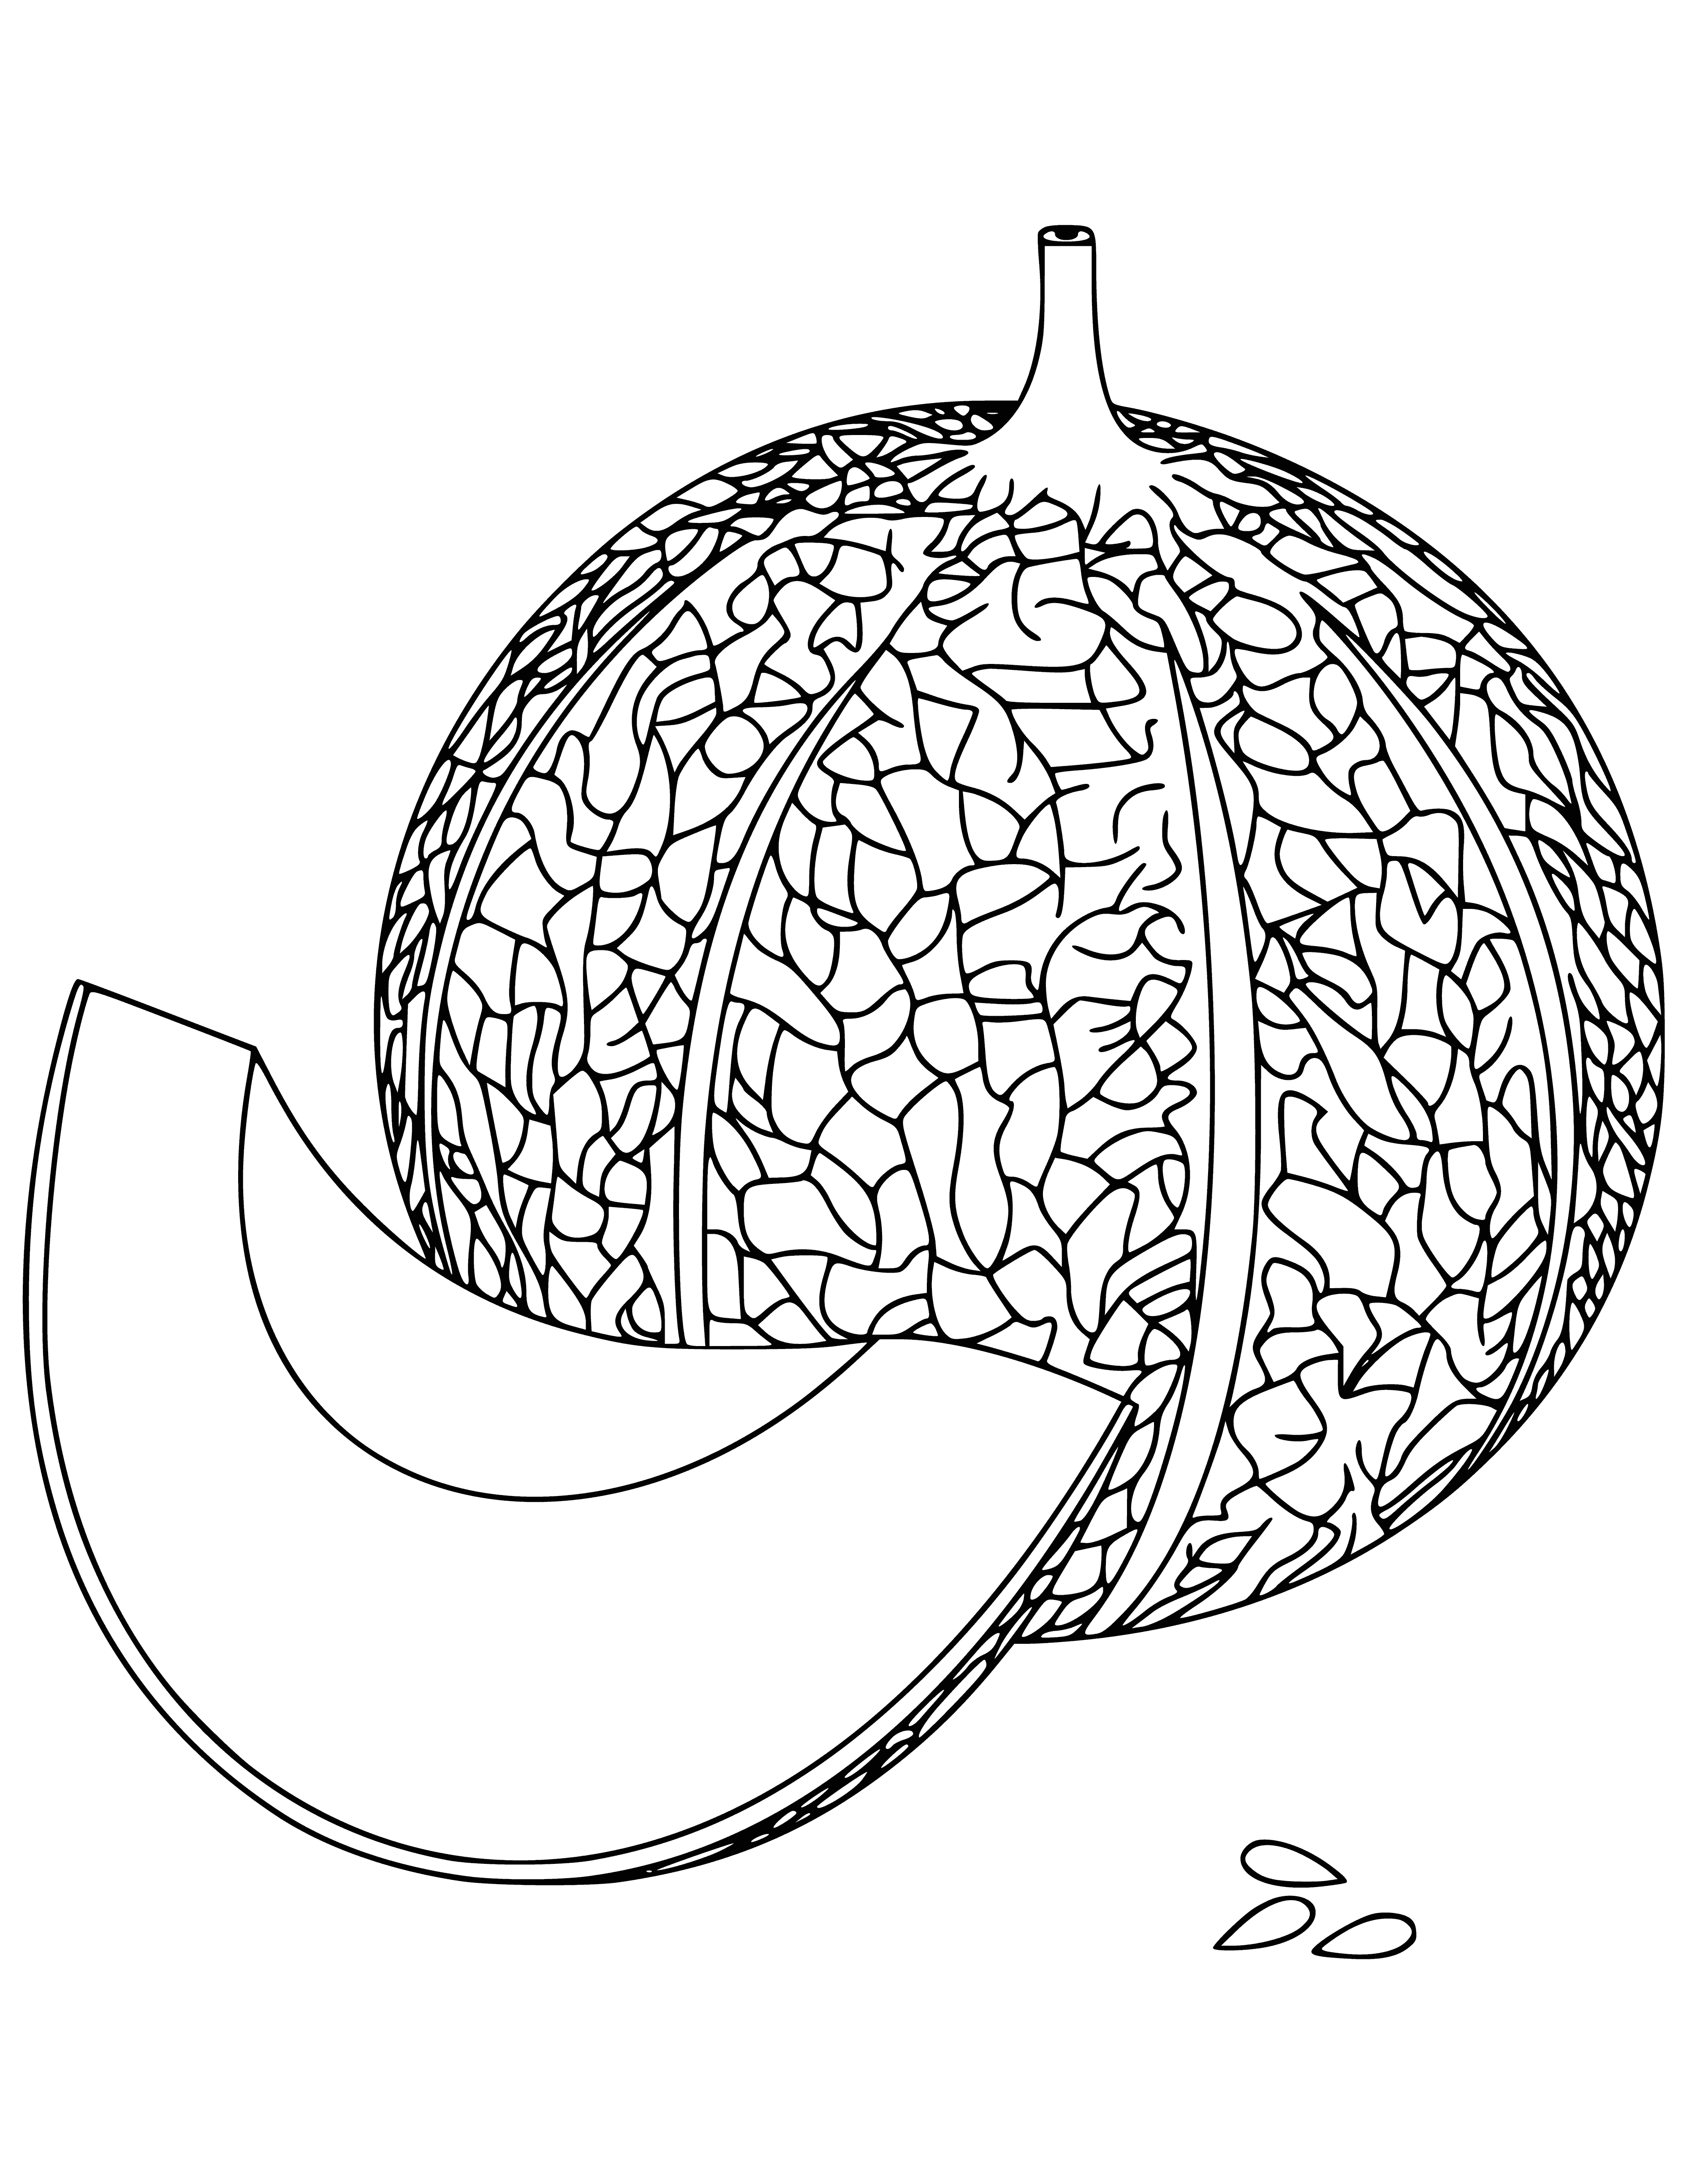 coloring page: Melons are sweet fruits with hard outer skin & edible flesh; they come in colors like green, yellow, & orange.